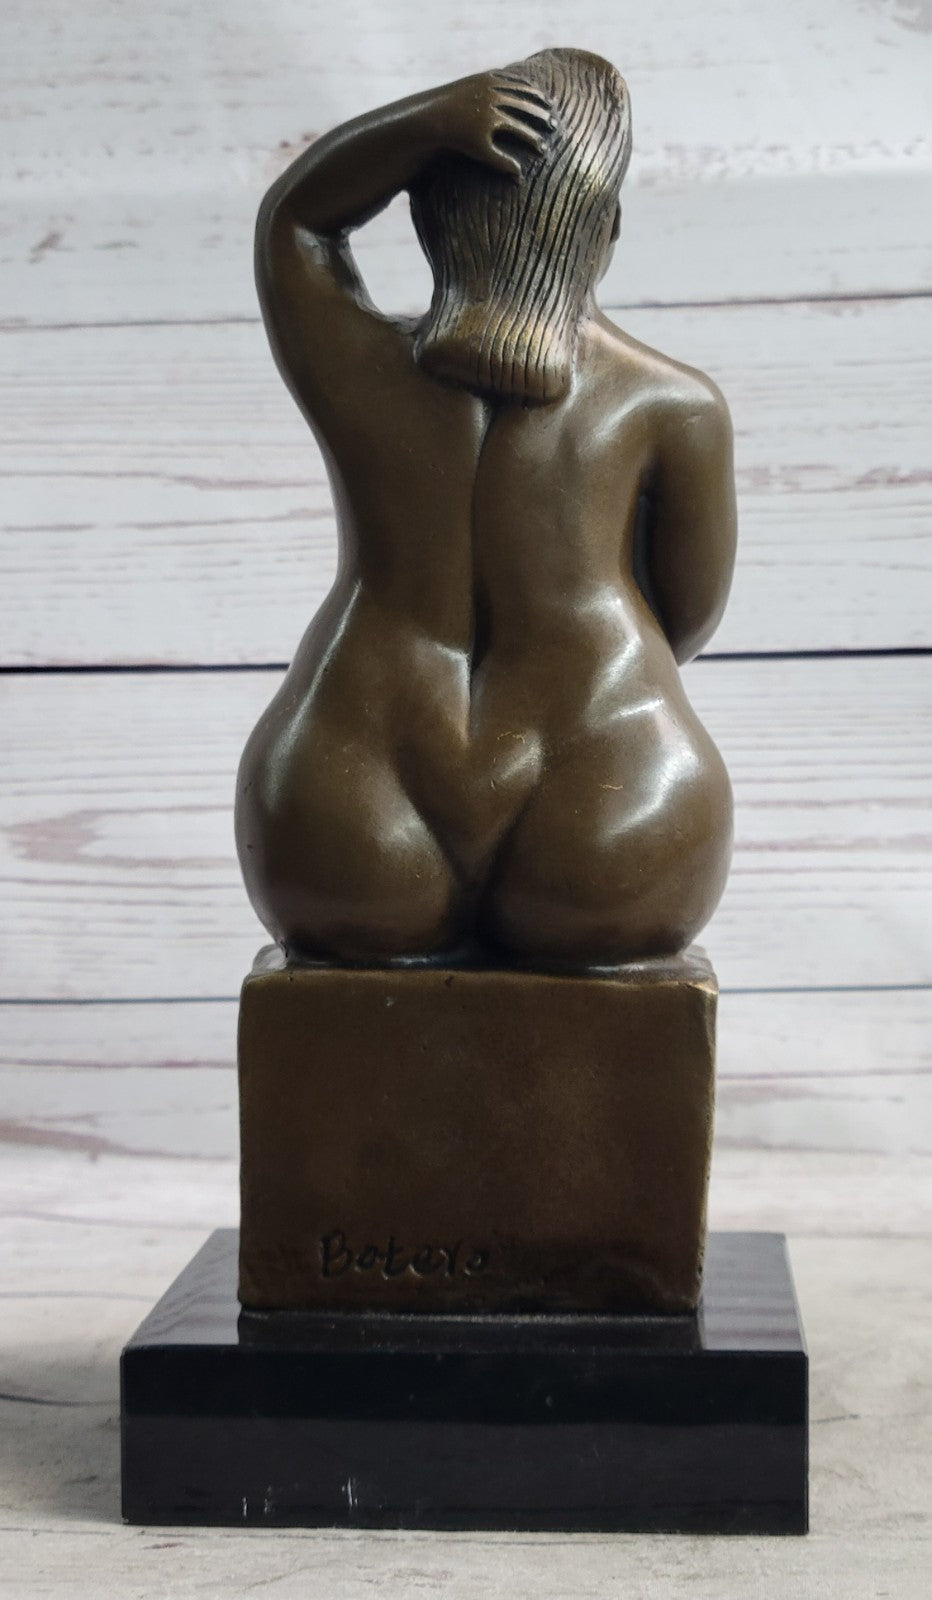 Hot Abstract Sexy Girl Tribute to Botero Style Bronze Sculpture Home Nude Décor